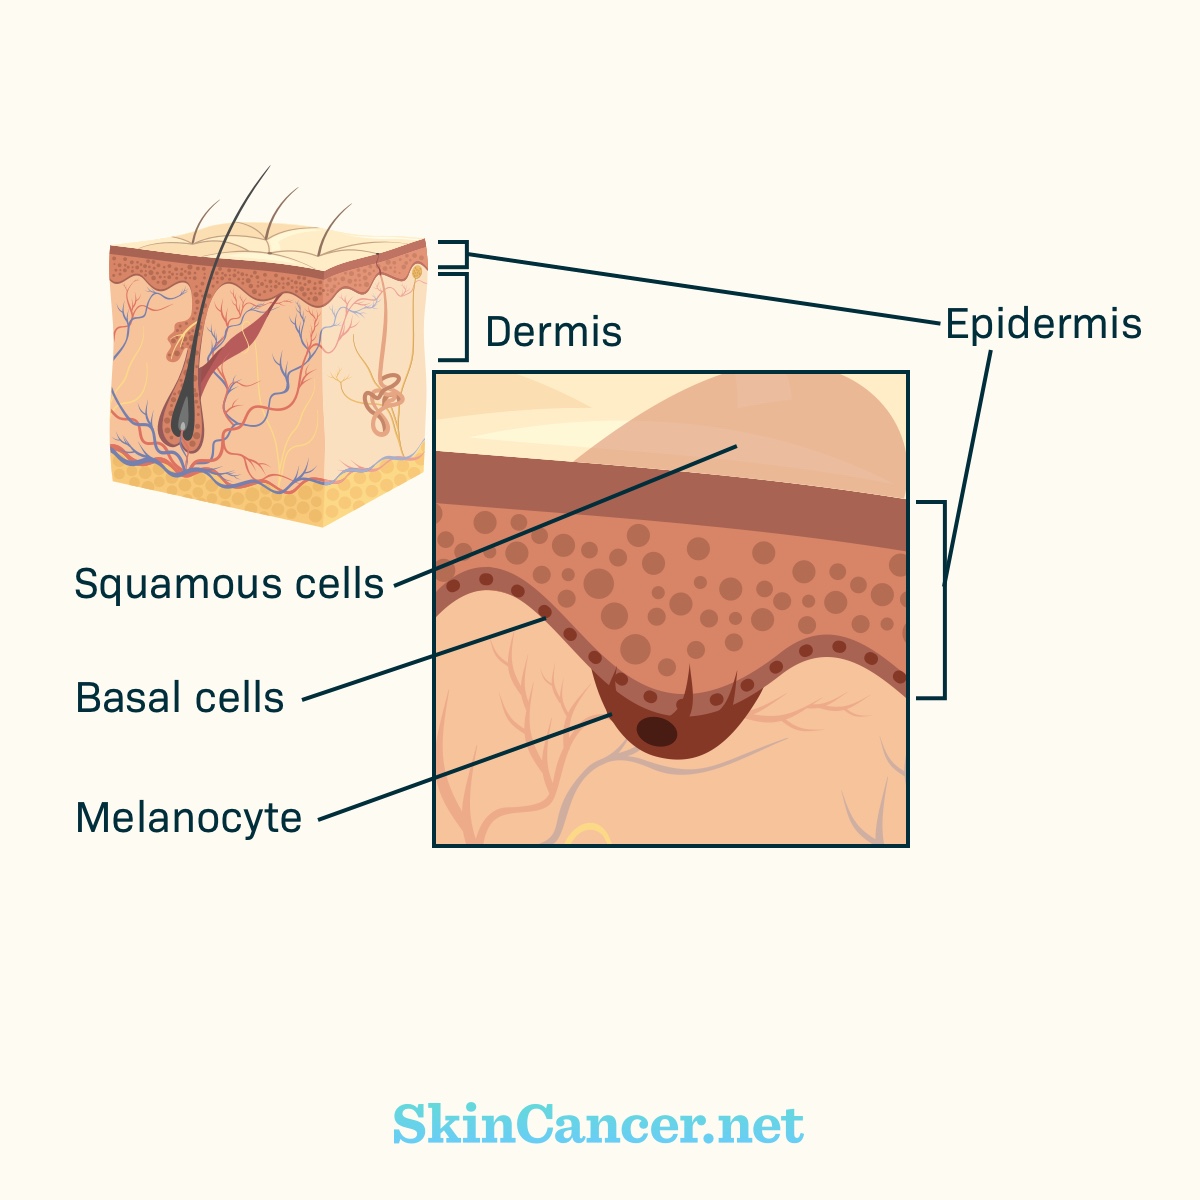 Squamous cell, basal cell, and melanocyte from dermis to epidermis respectively